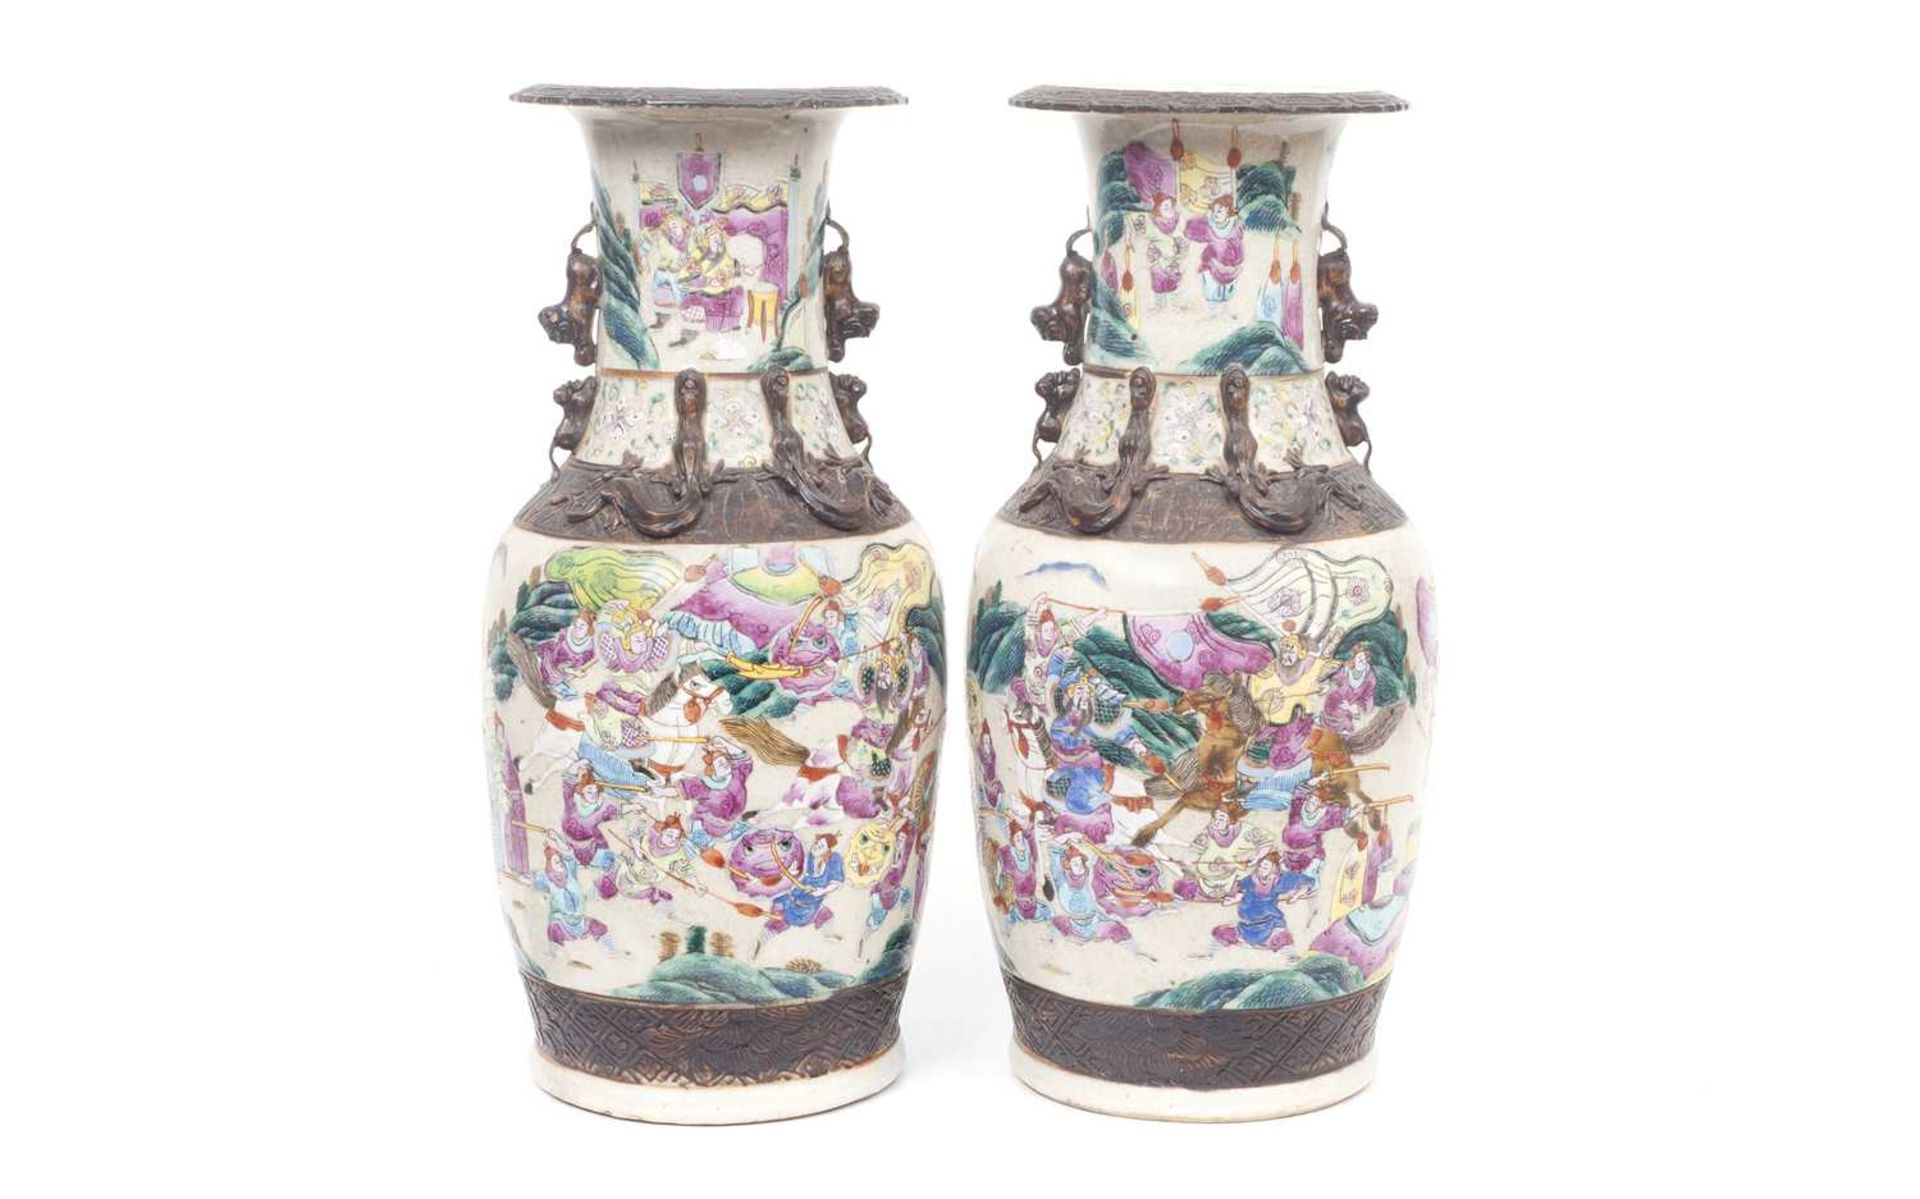 A PAIR OF LATE 19TH / EARLY 20TH CENTURY CHINESE CRACKLE GLAZED PORCELAIN VASES - Image 2 of 3